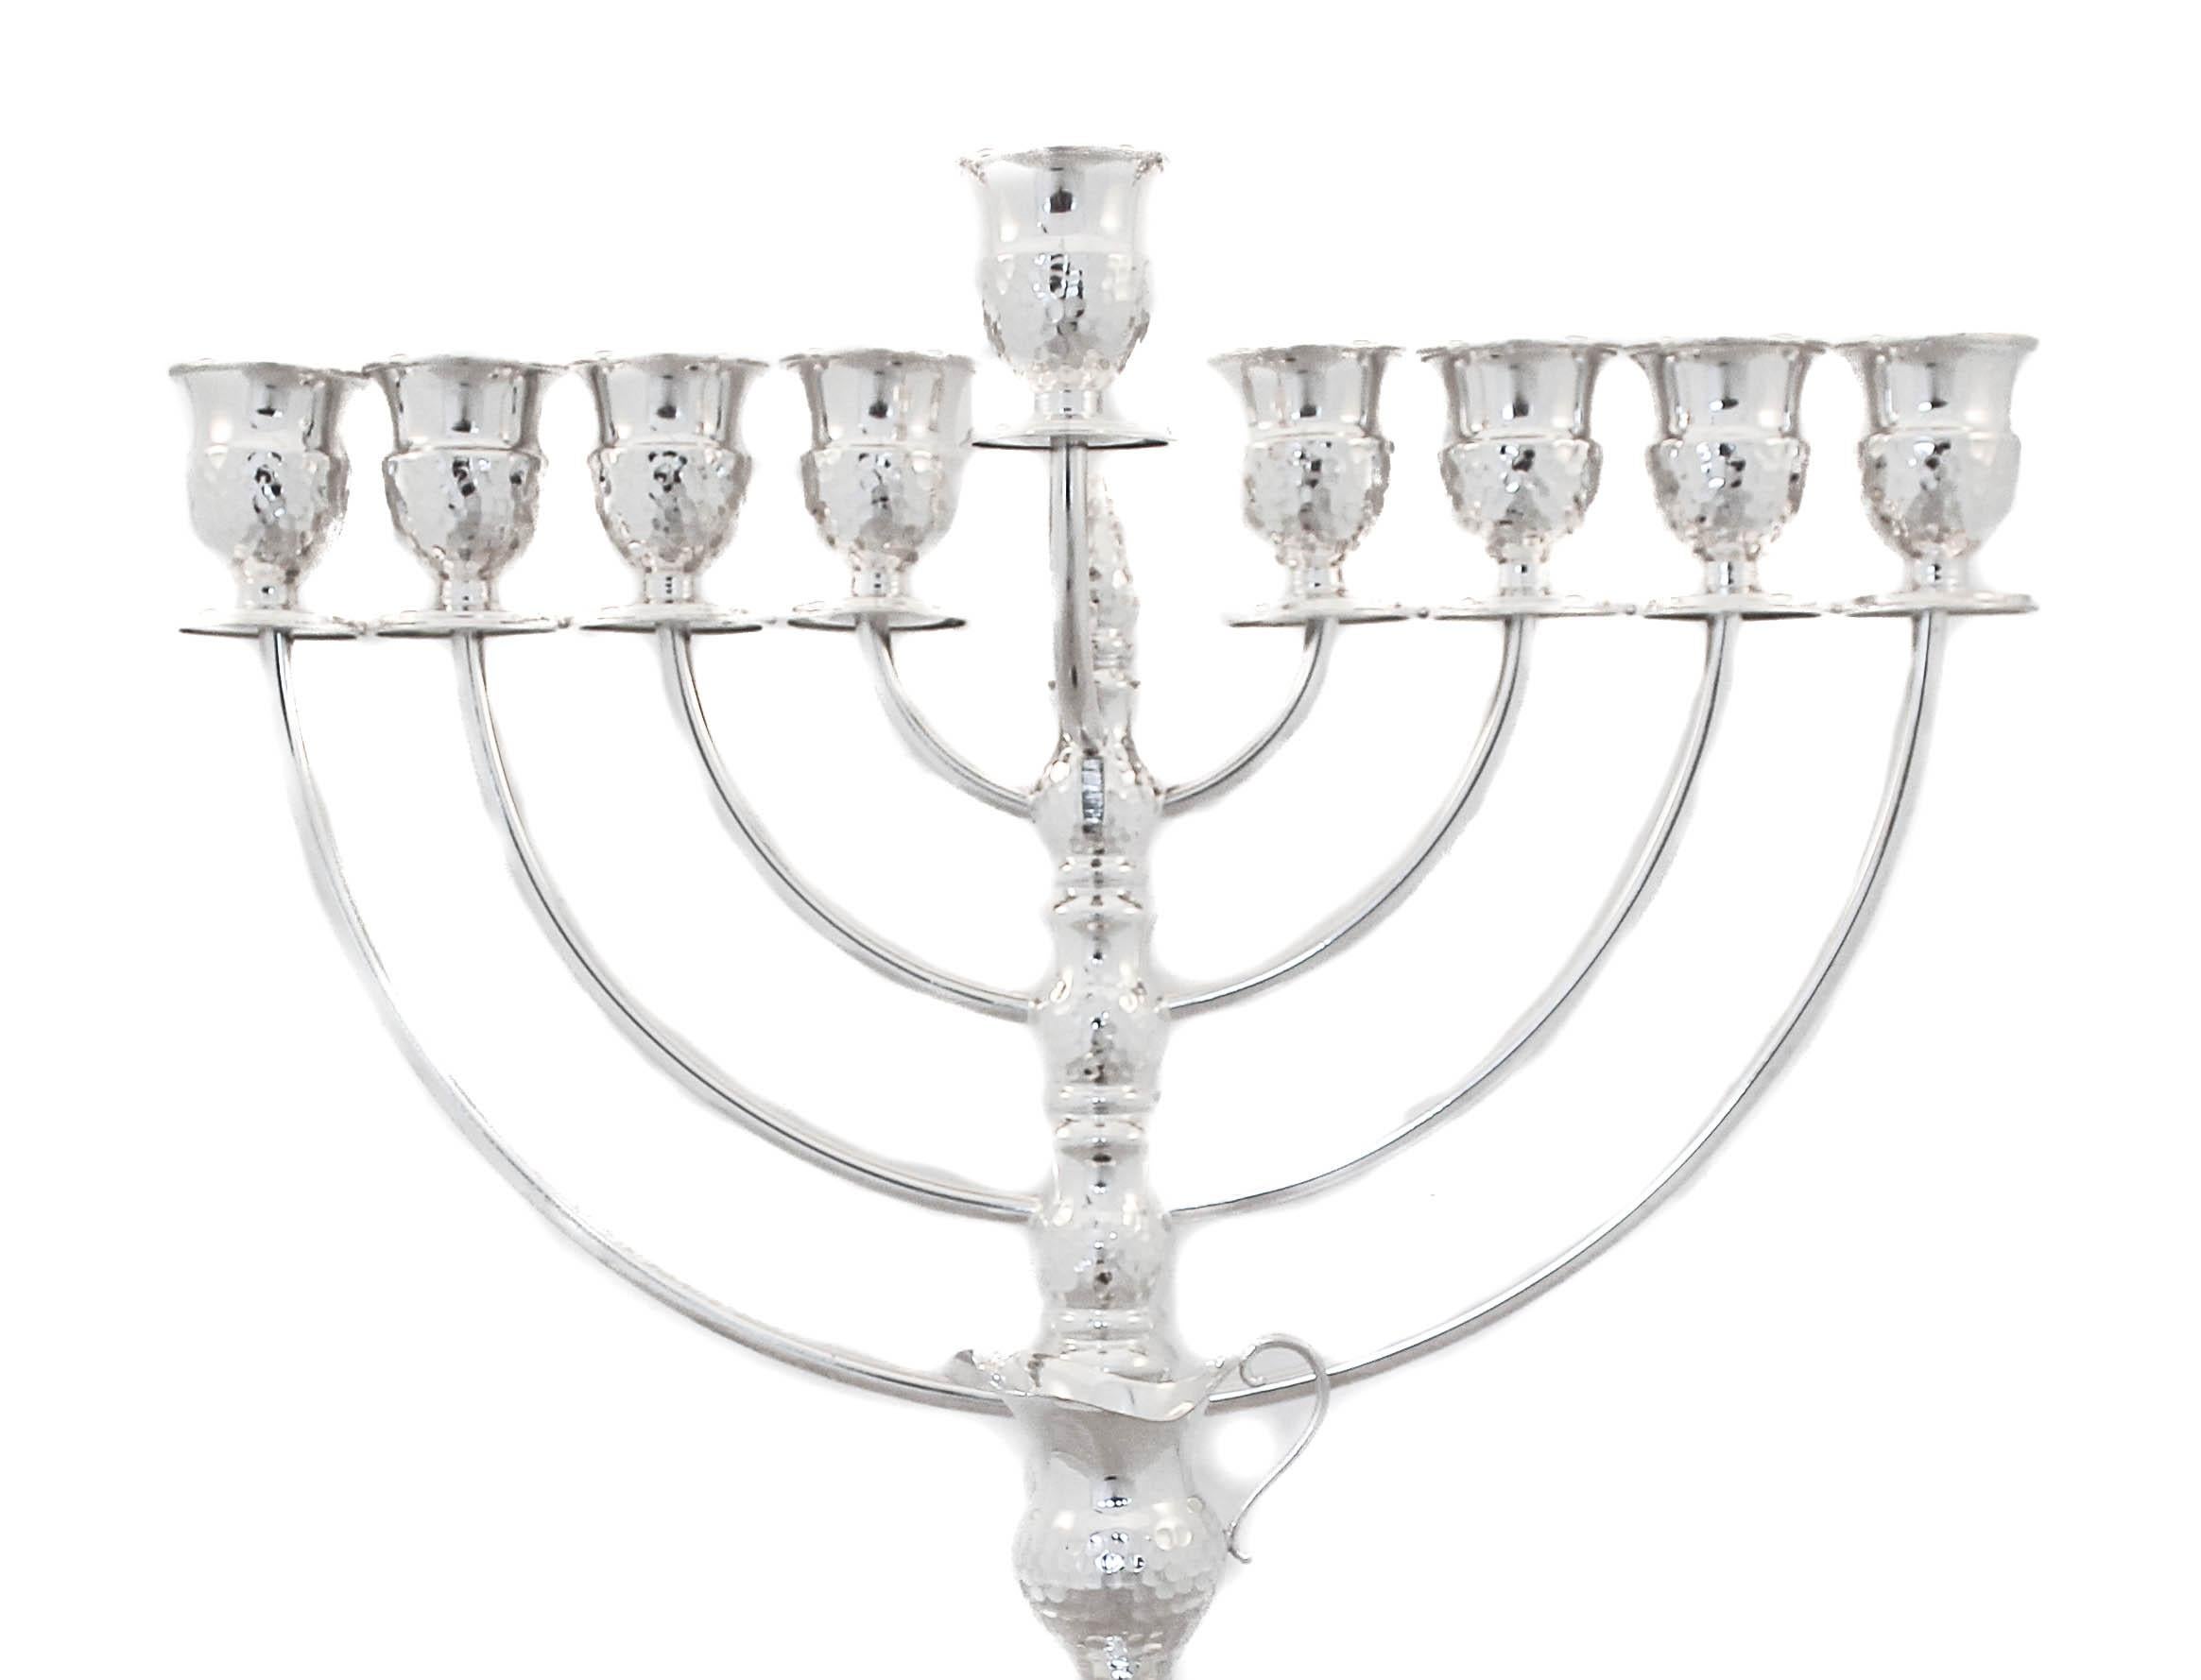 We are happy to offer you this sterling silver hammered menorah. With Hanukkah just a few weeks away, now is the time to treat yourself to a gorgeous new silver menorah. It has a hammered finish that is contemporary and yet classic. The top portion